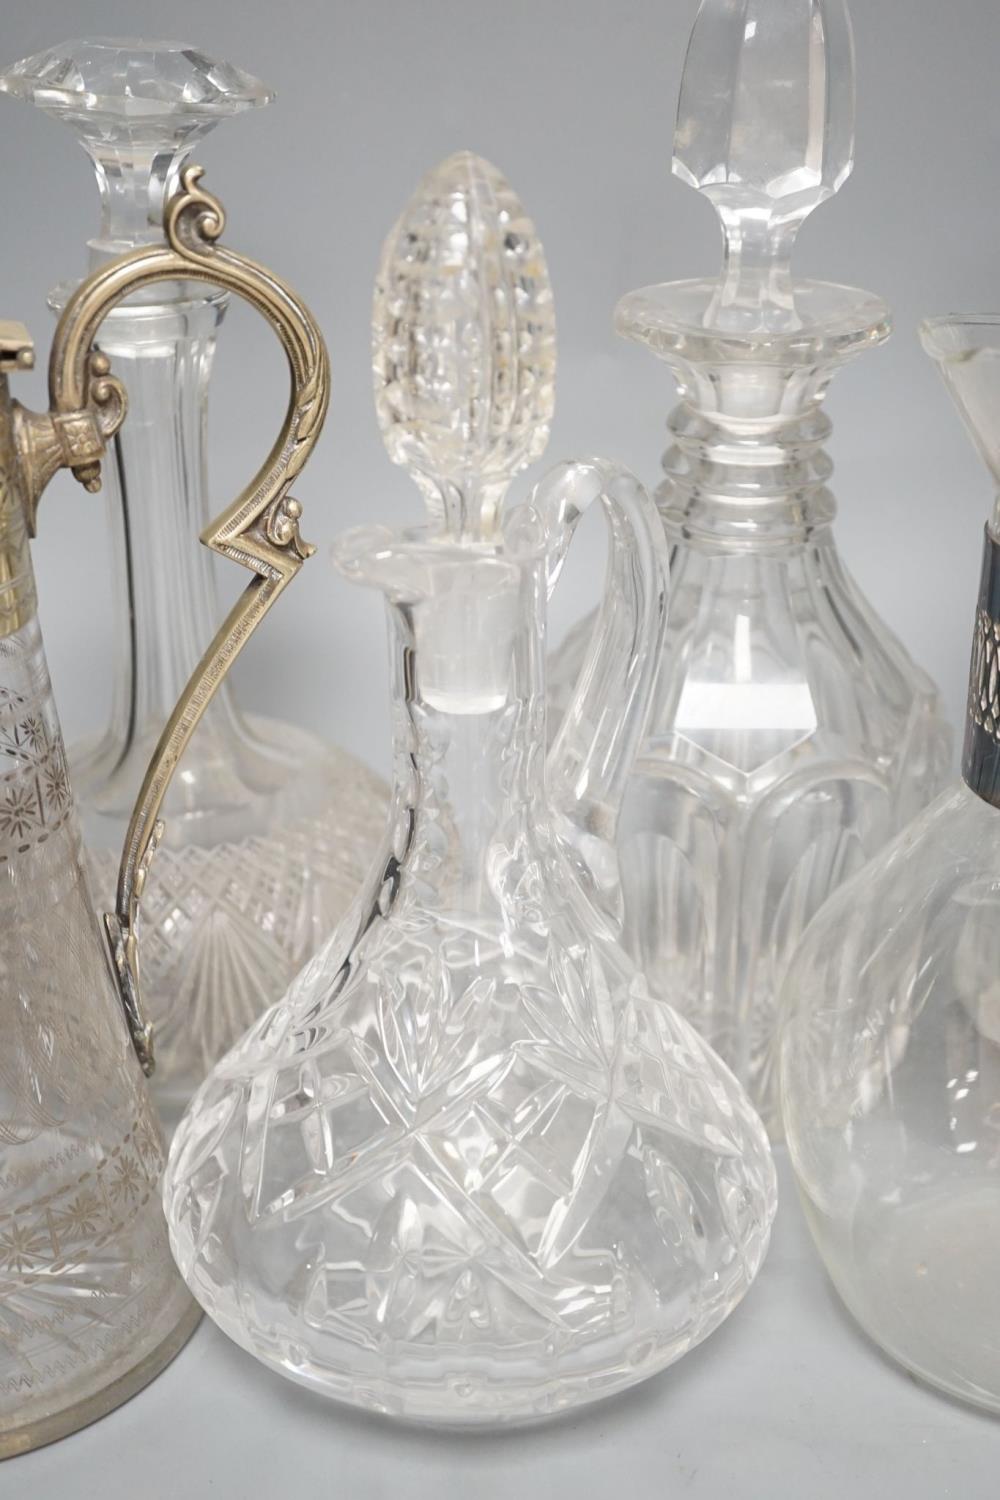 A Hukin and Heath claret jug and other decanters etc. - Image 3 of 9